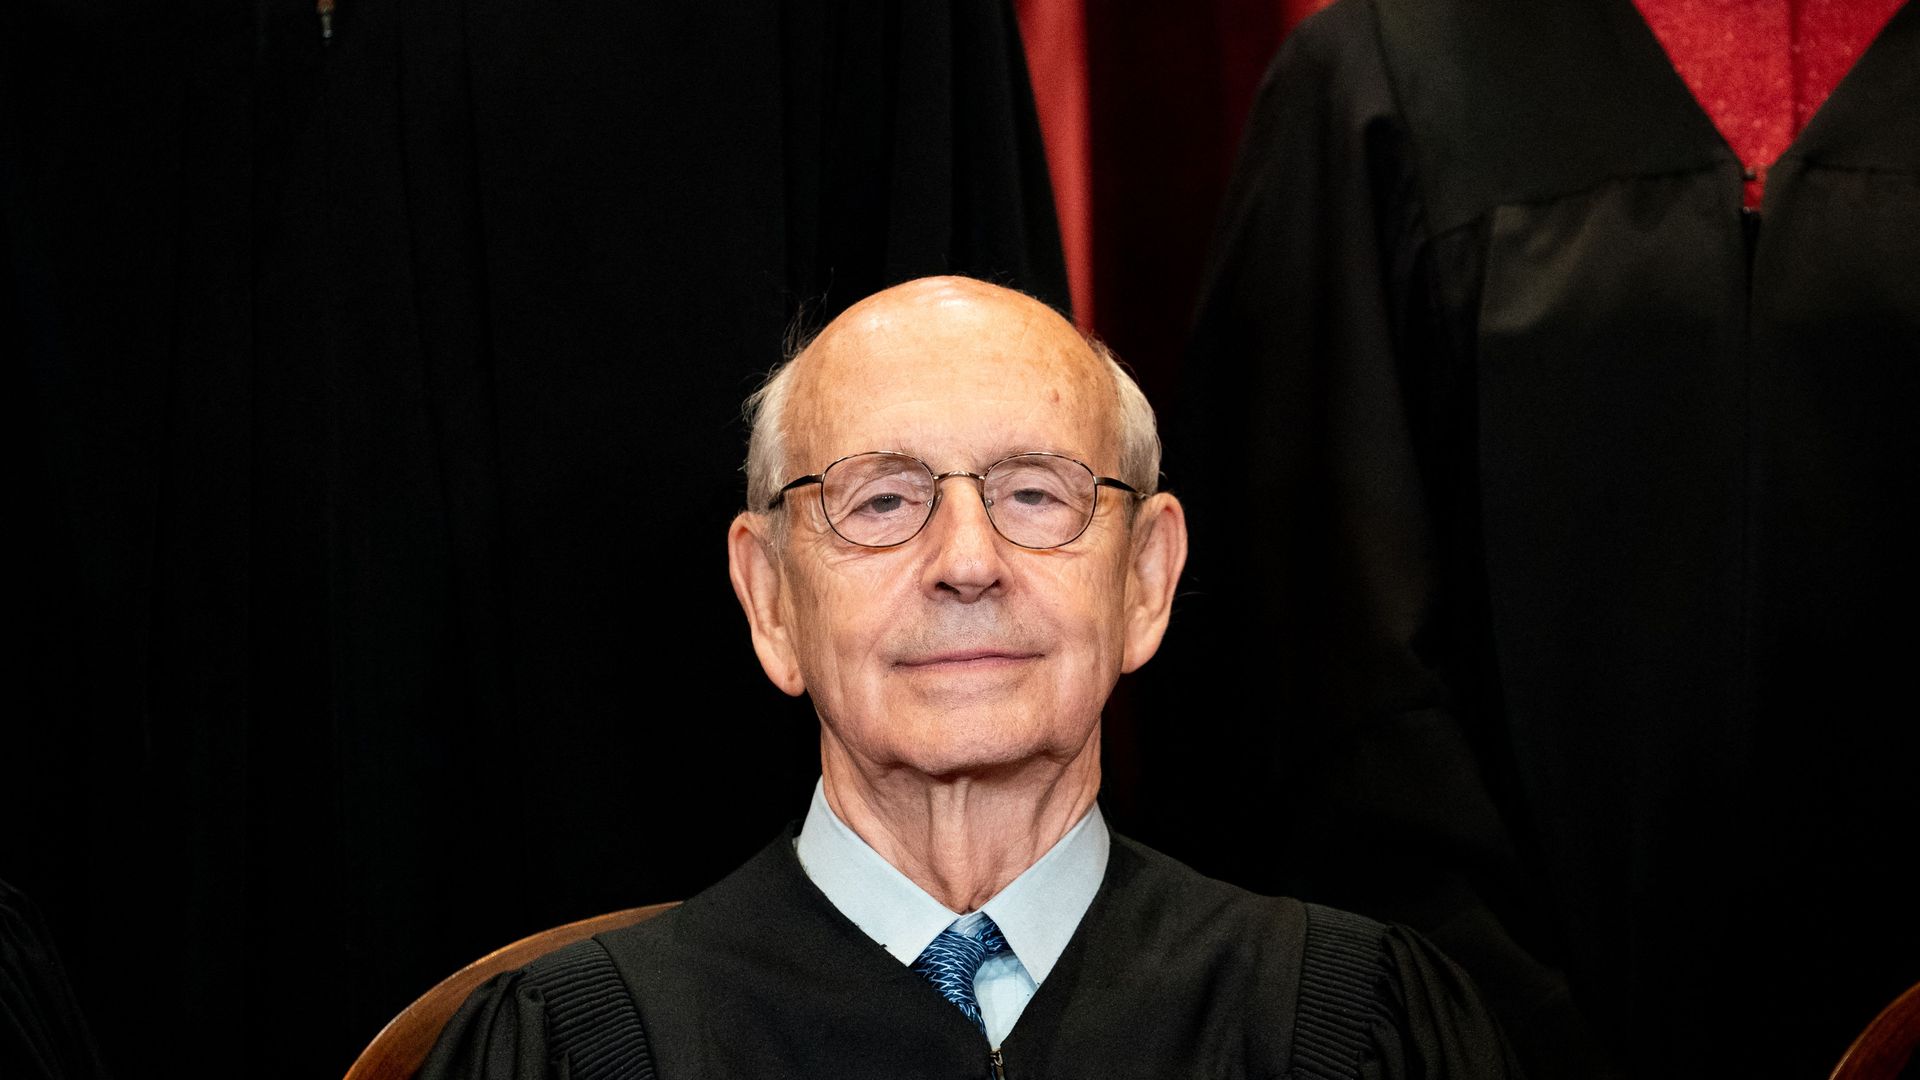 Justice Stephen Breyer during a group photo at the Supreme Court in April 2021.